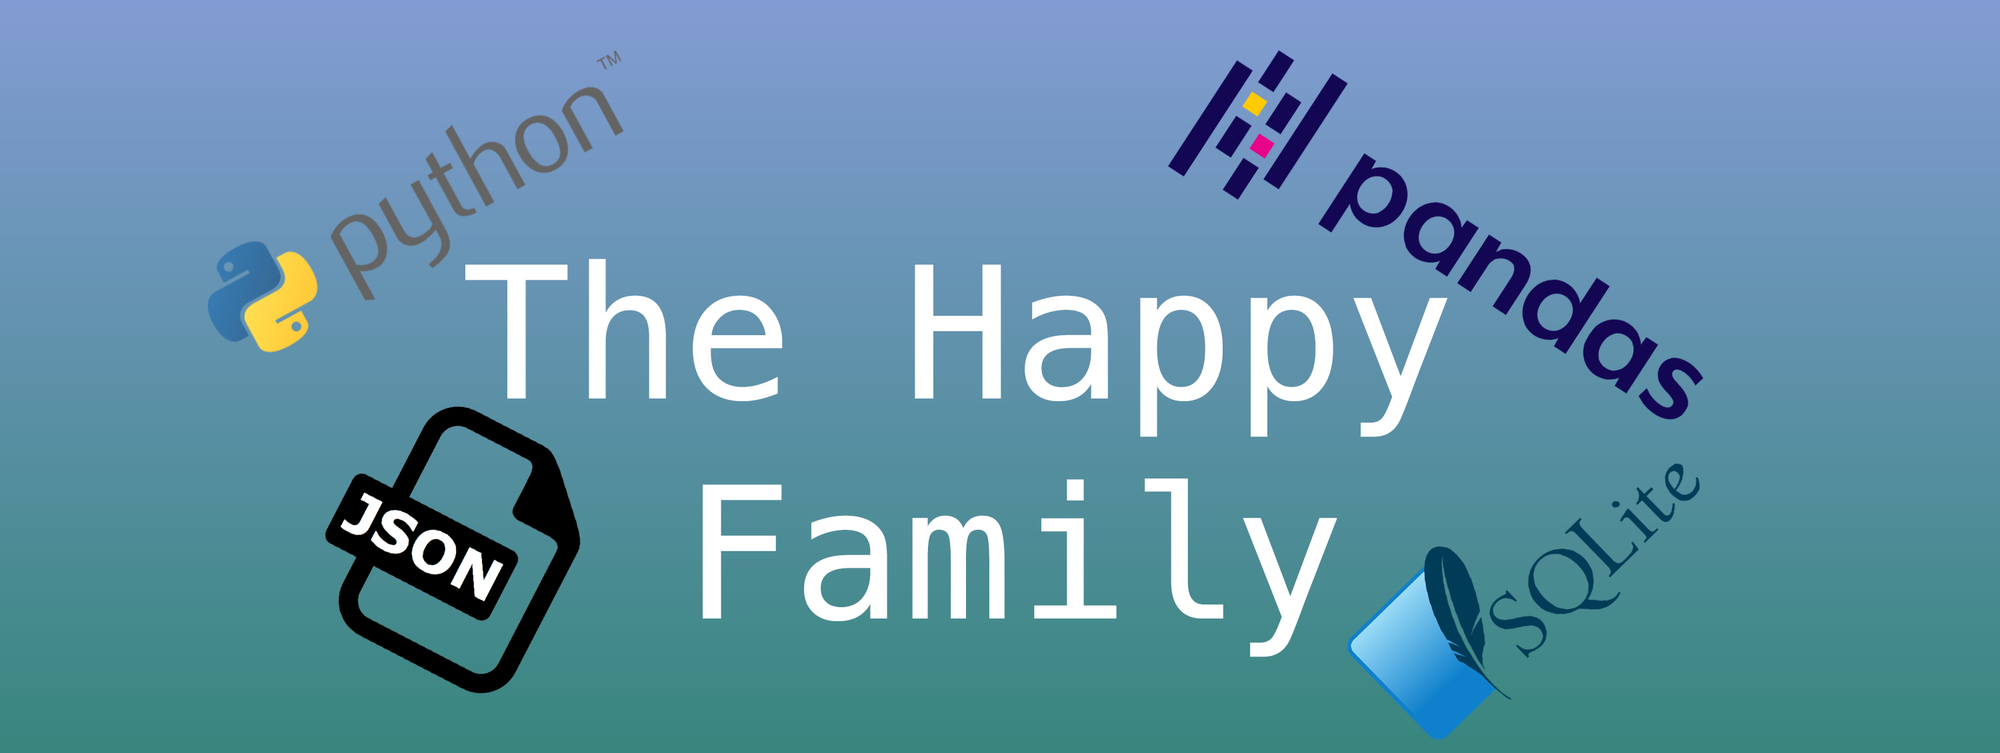 😀 JSON to Pandas to SQL: "The Happy Family"